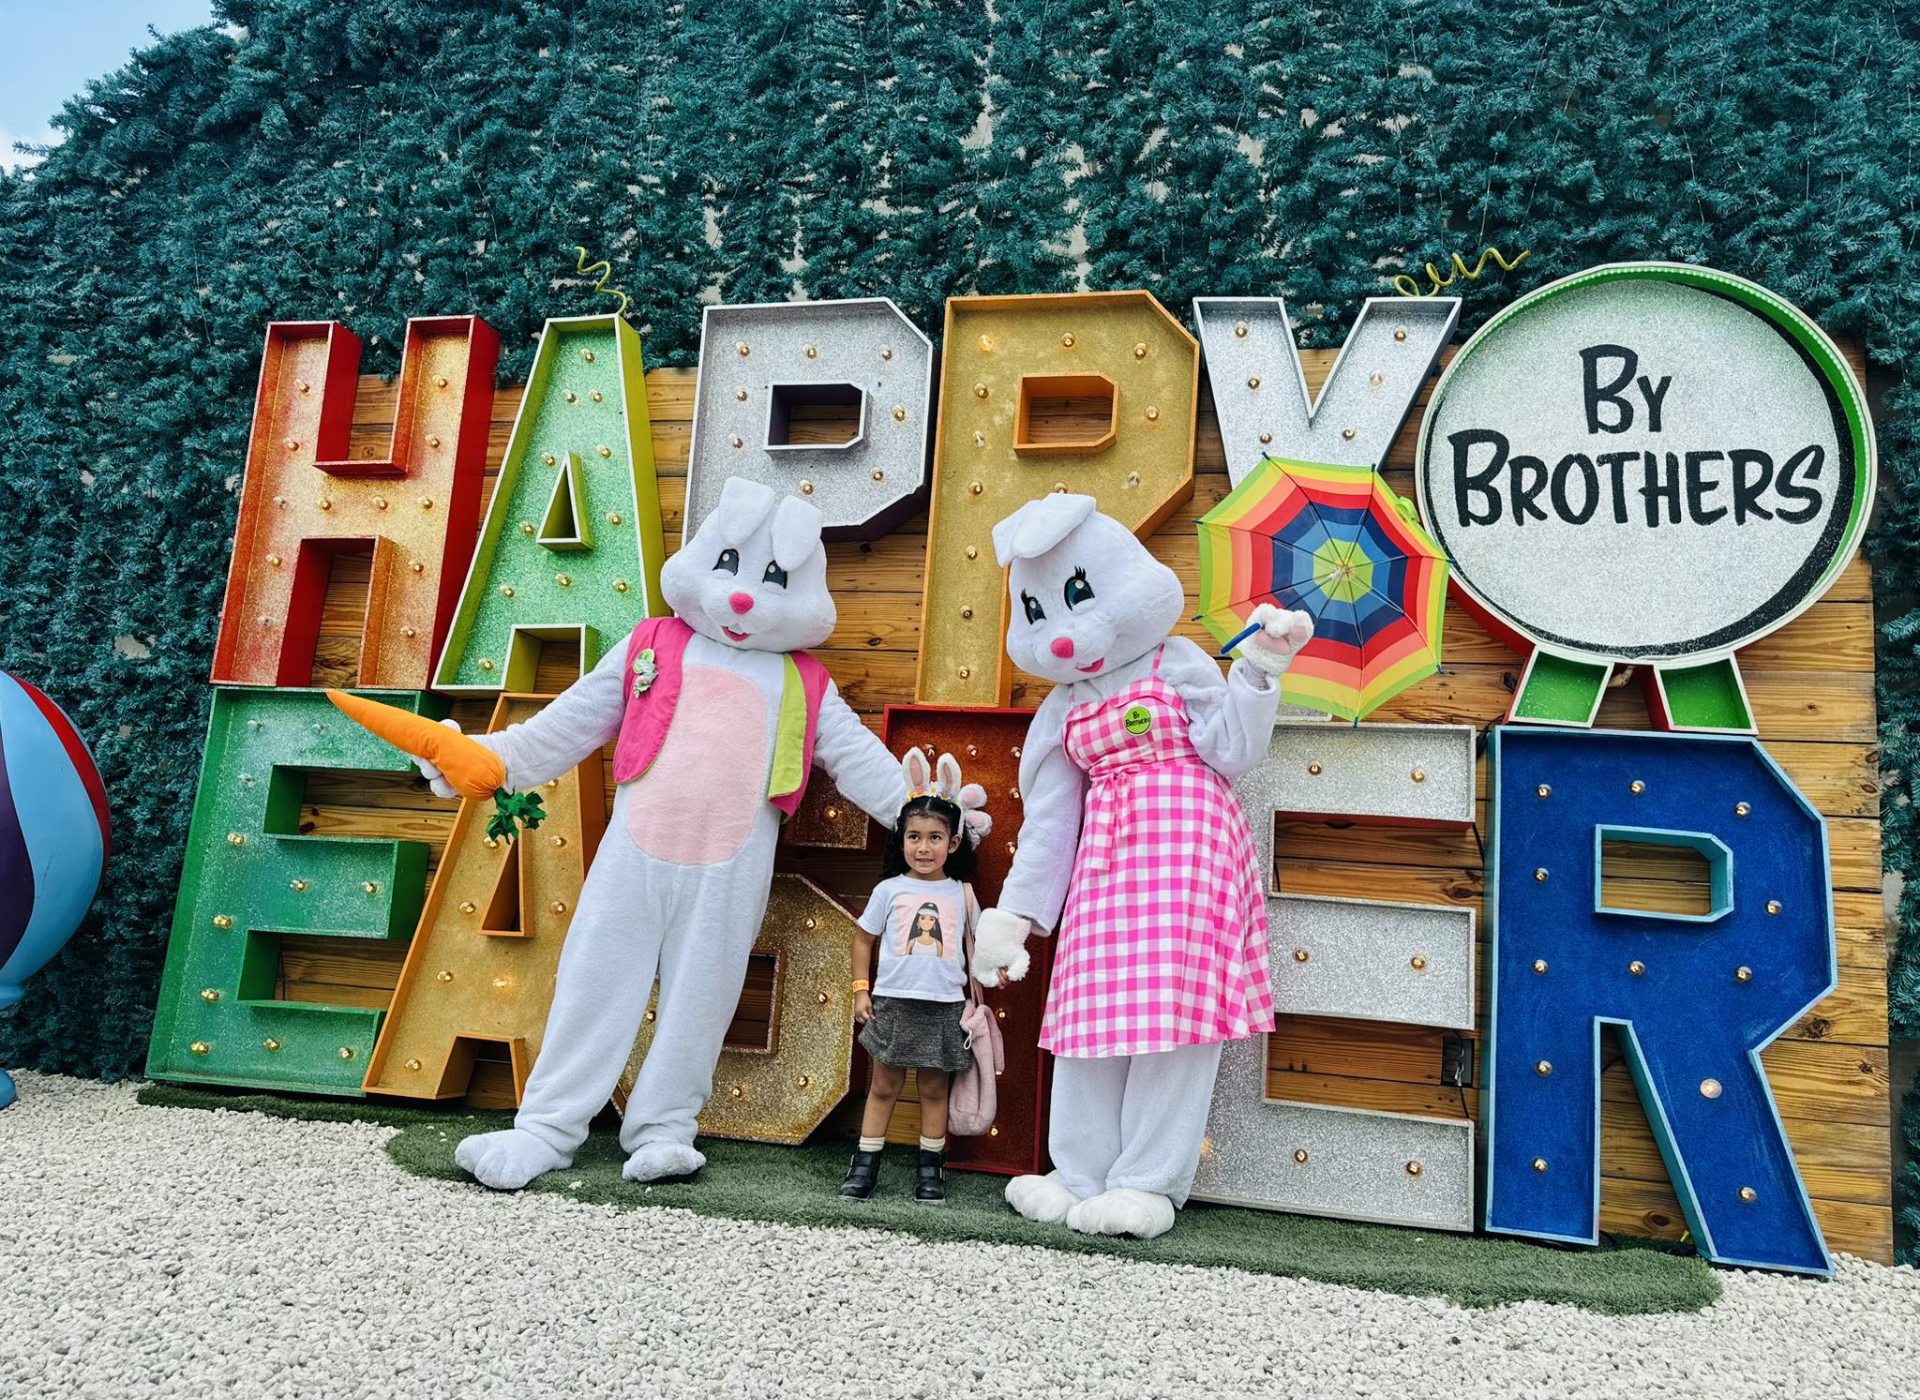 By Brothers - Easter